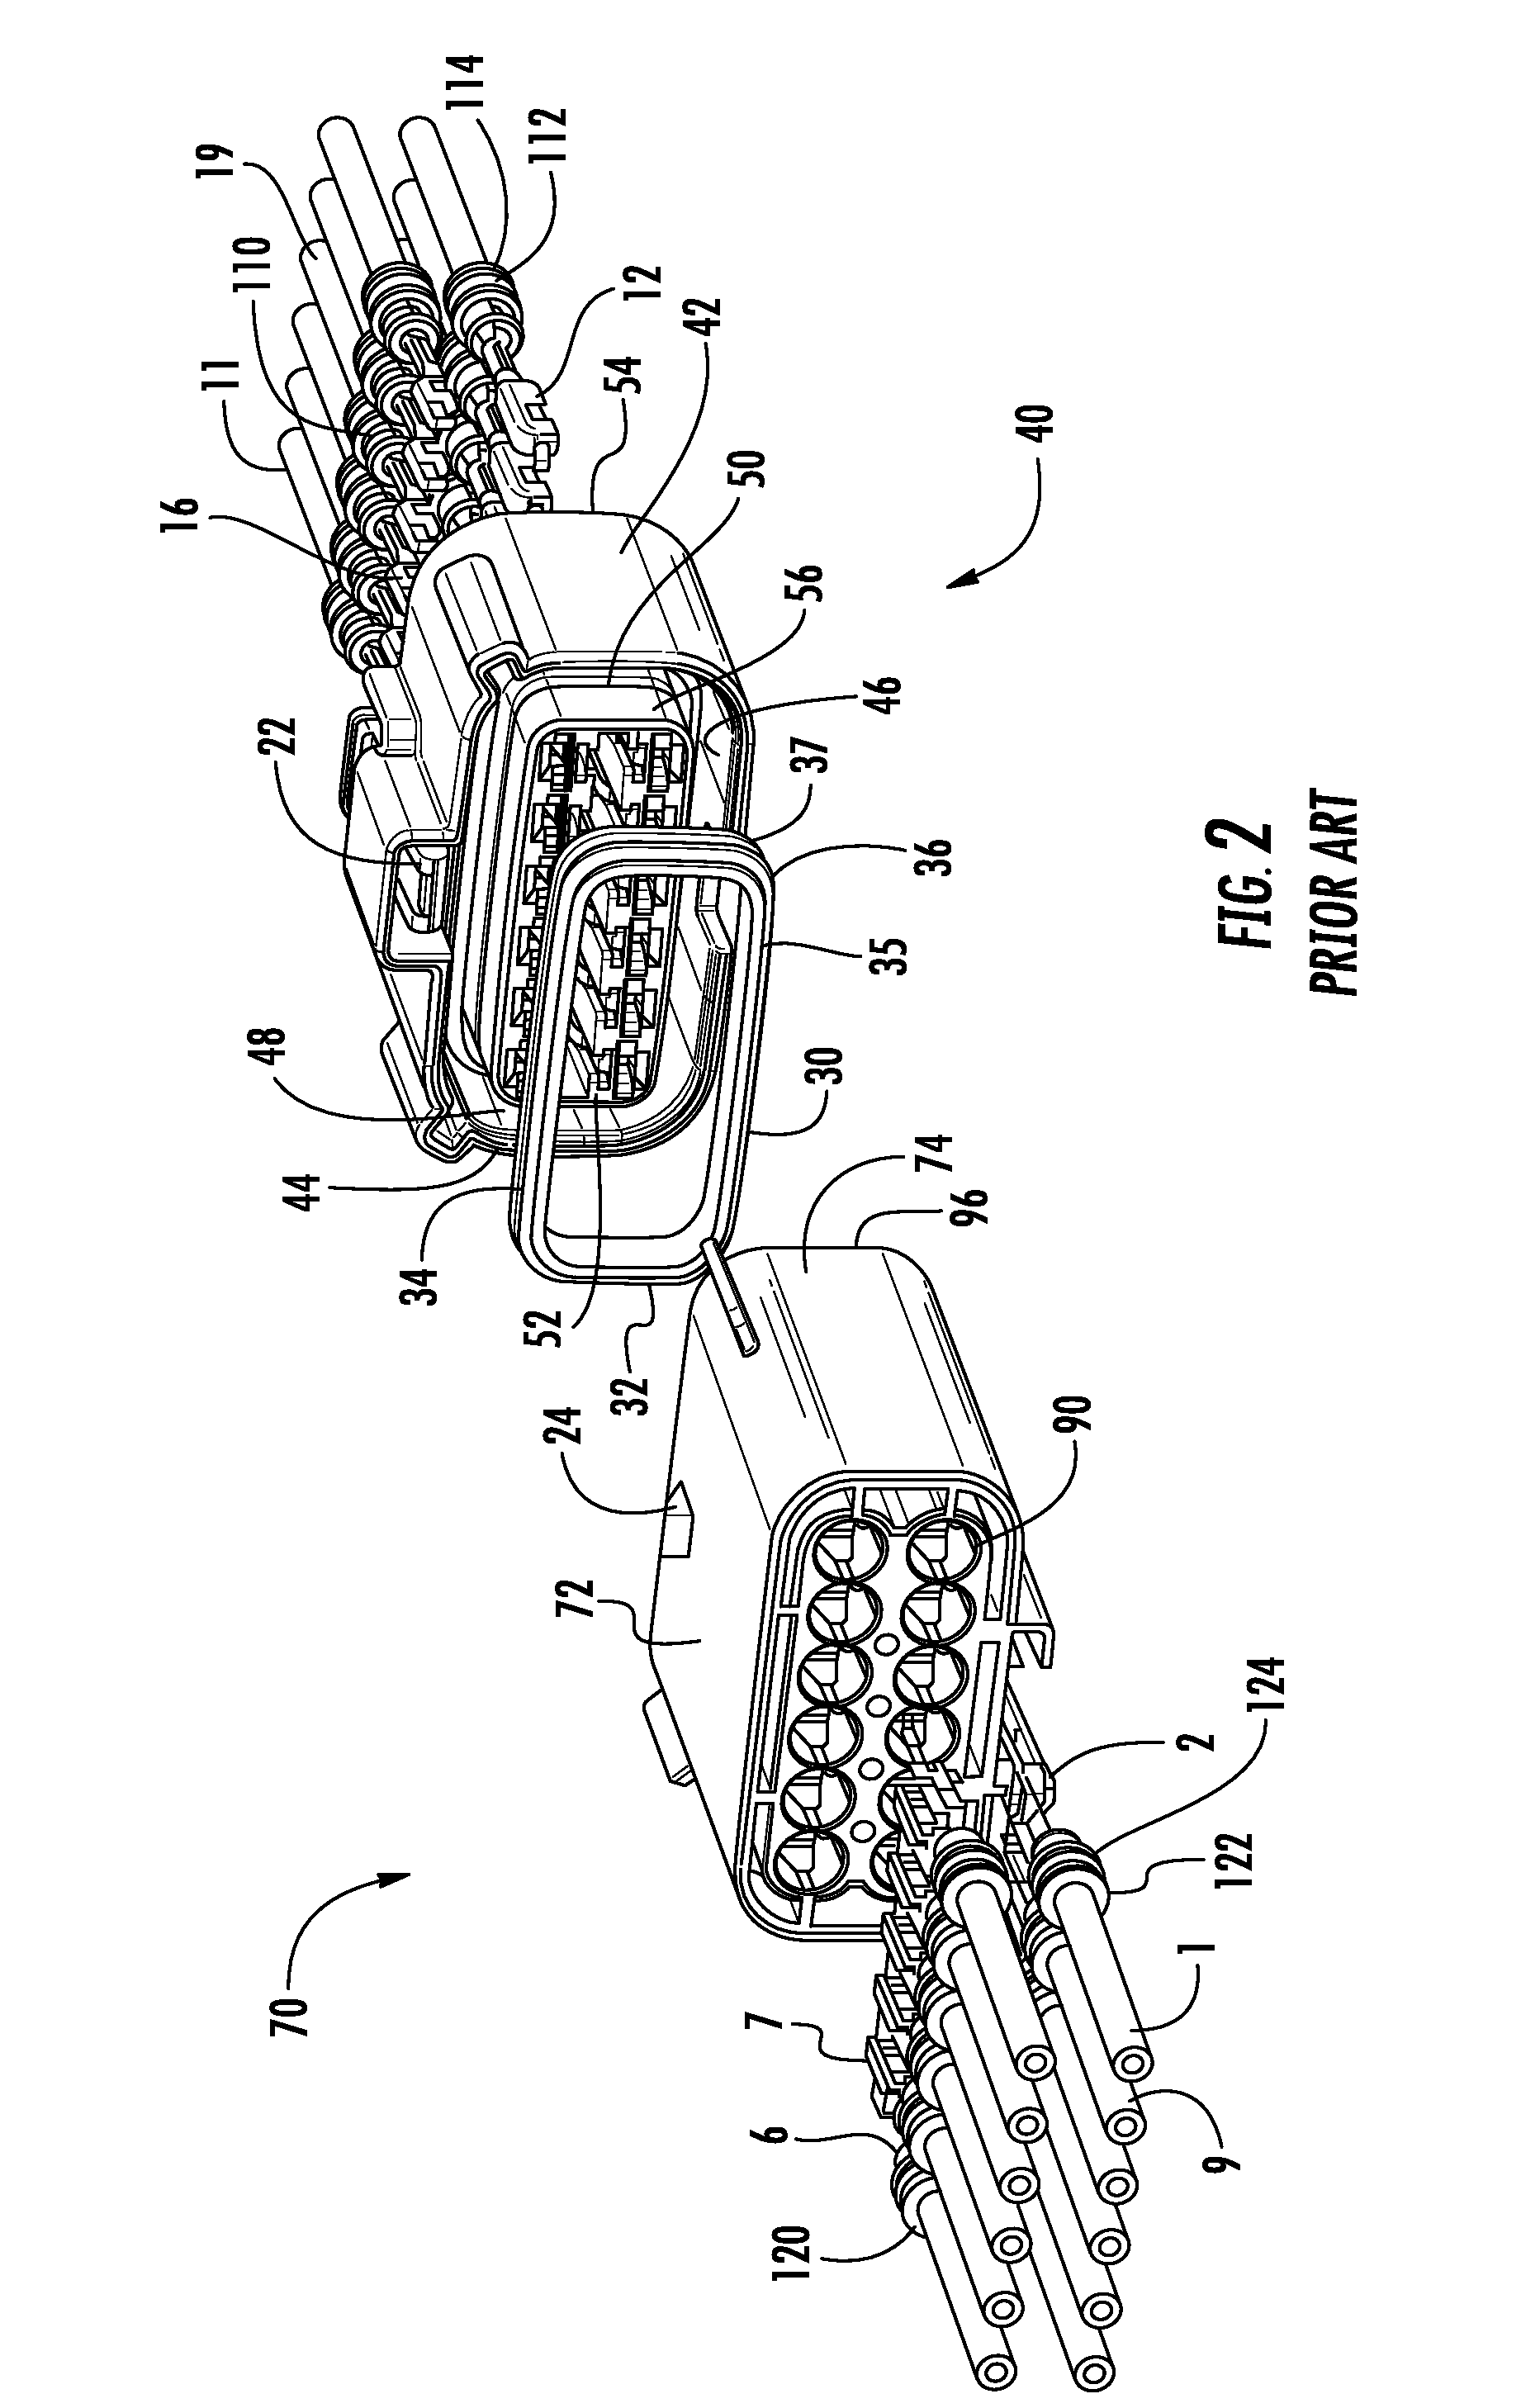 Electrical harness connector system with differential pair connection link